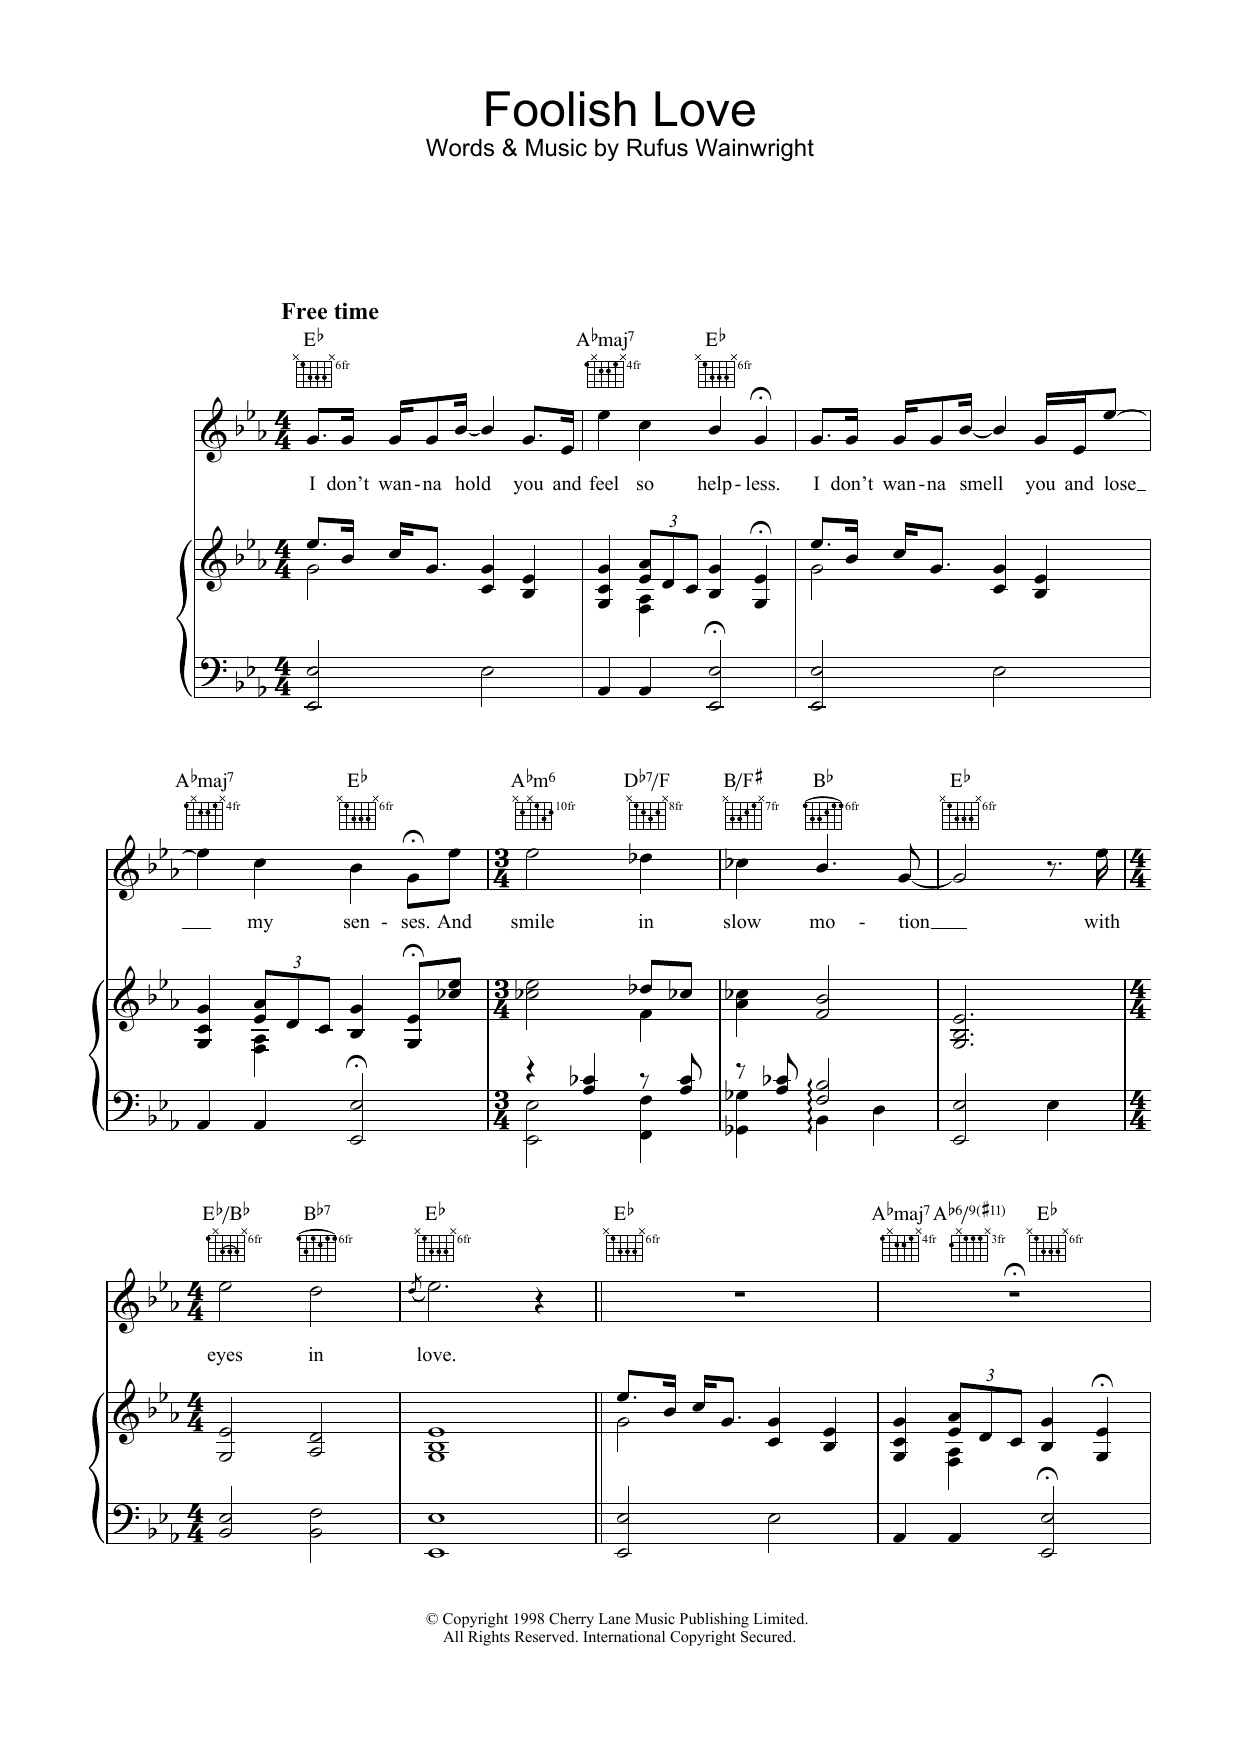 Rufus Wainwright Foolish Love sheet music preview music notes and score for Piano, Vocal & Guitar including 7 page(s)